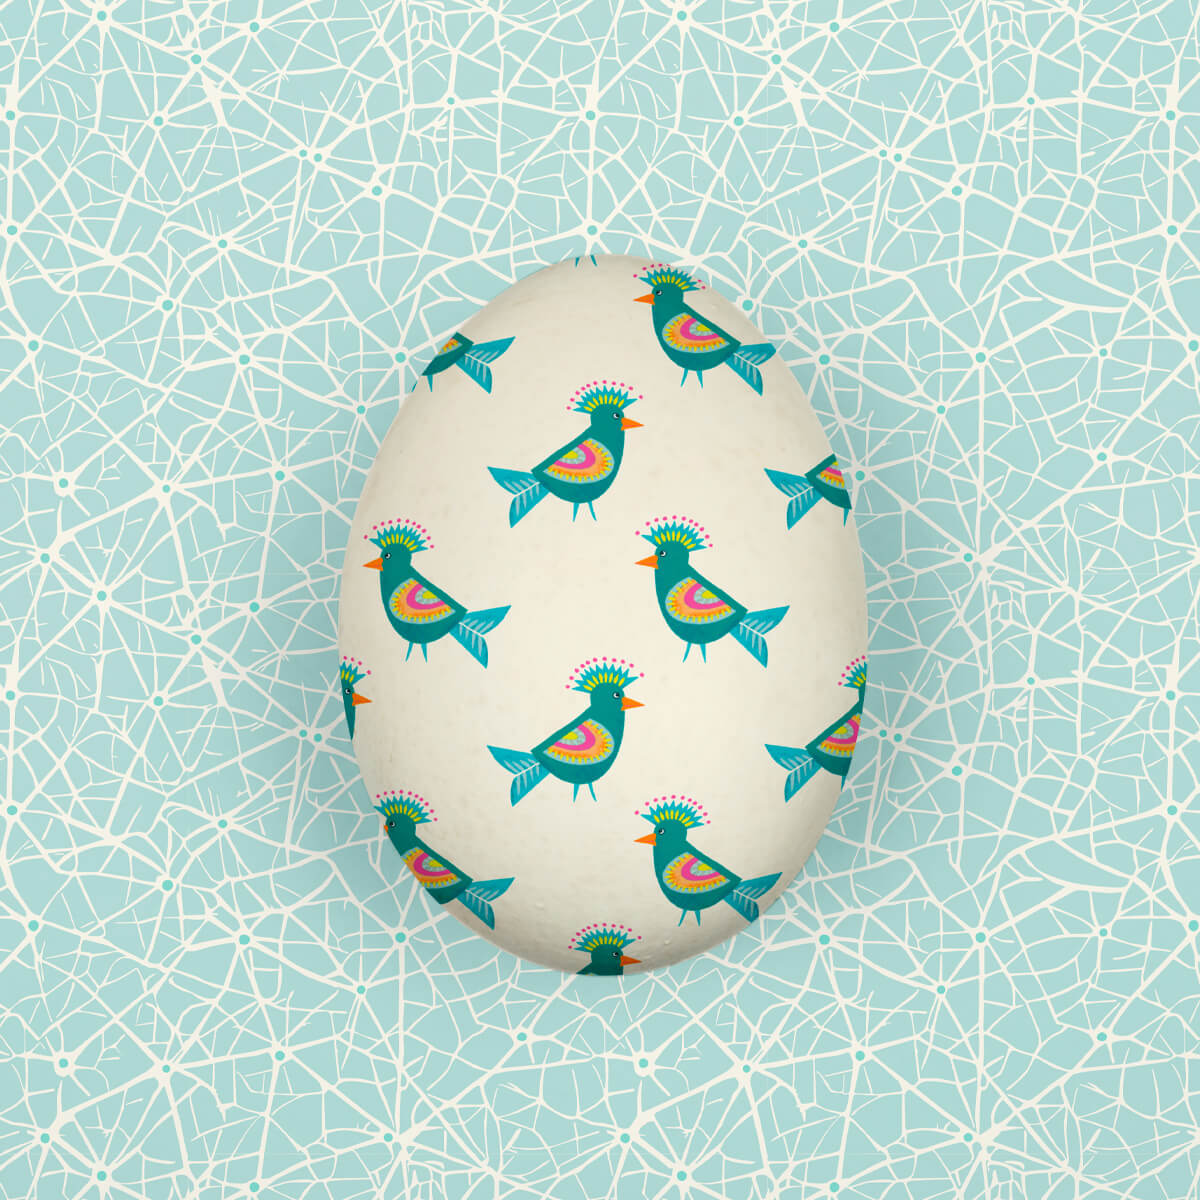 easter egg with a pattern of small birds